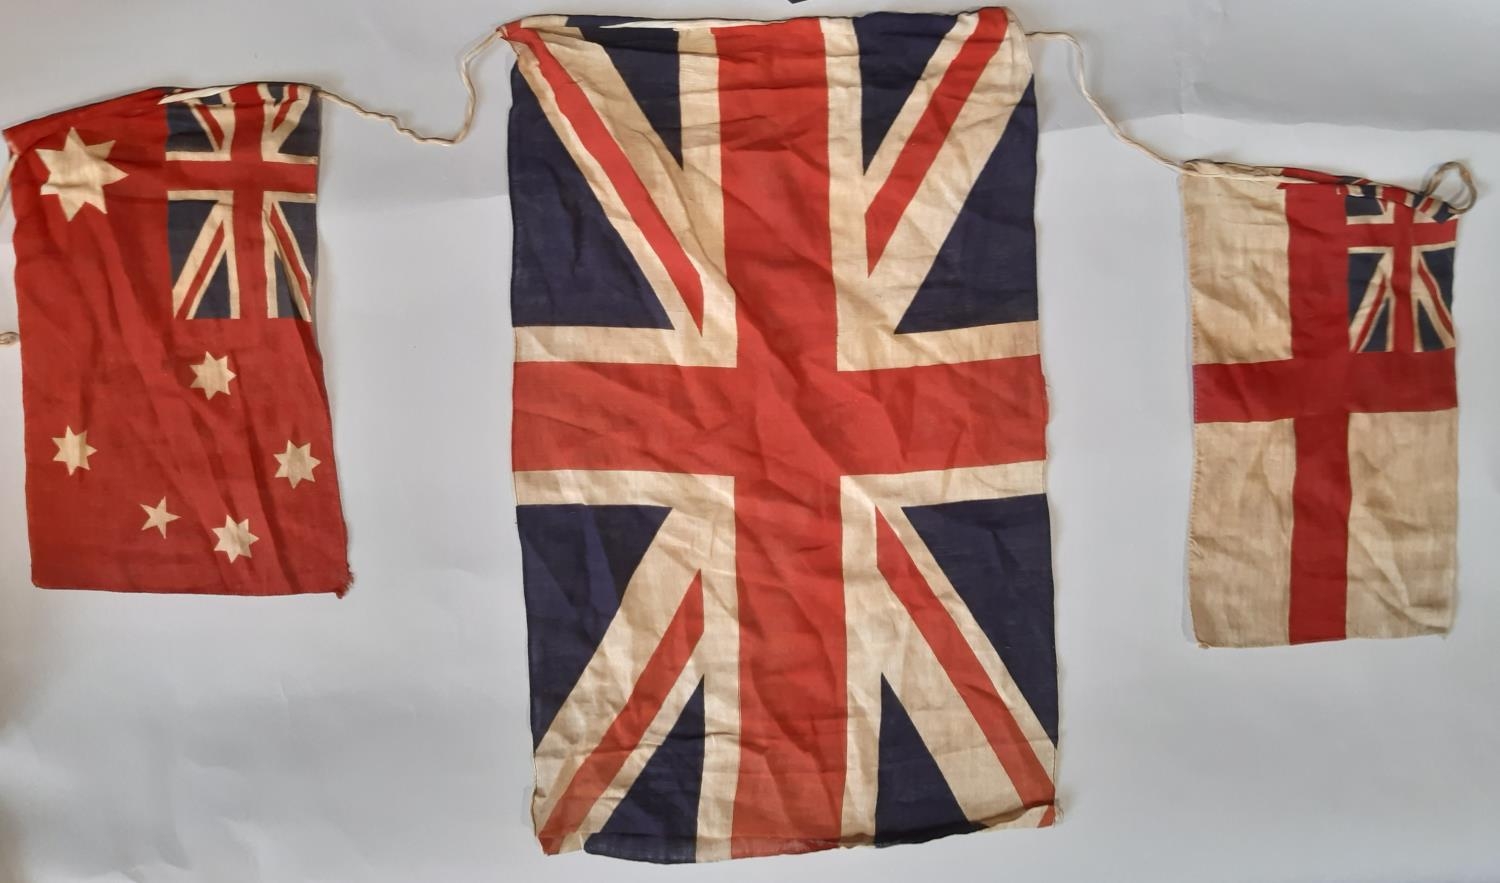 Vintage Empire Royal Standard Bunting, with emblems of Australia, South Africa, New Zealand, Canada, - Image 4 of 4